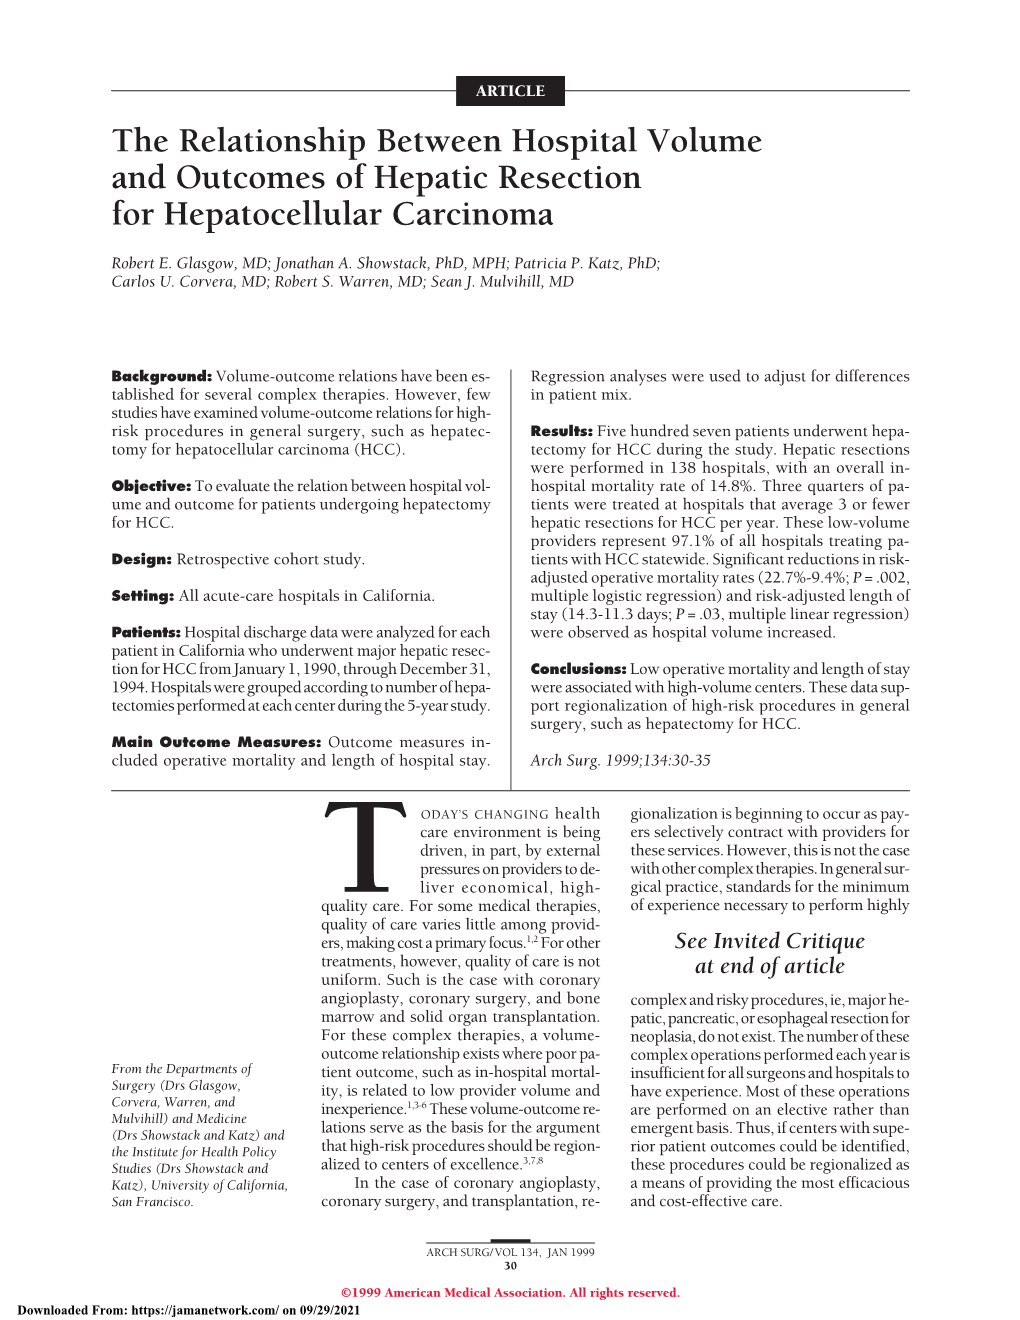 The Relationship Between Hospital Volume and Outcomes of Hepatic Resection for Hepatocellular Carcinoma